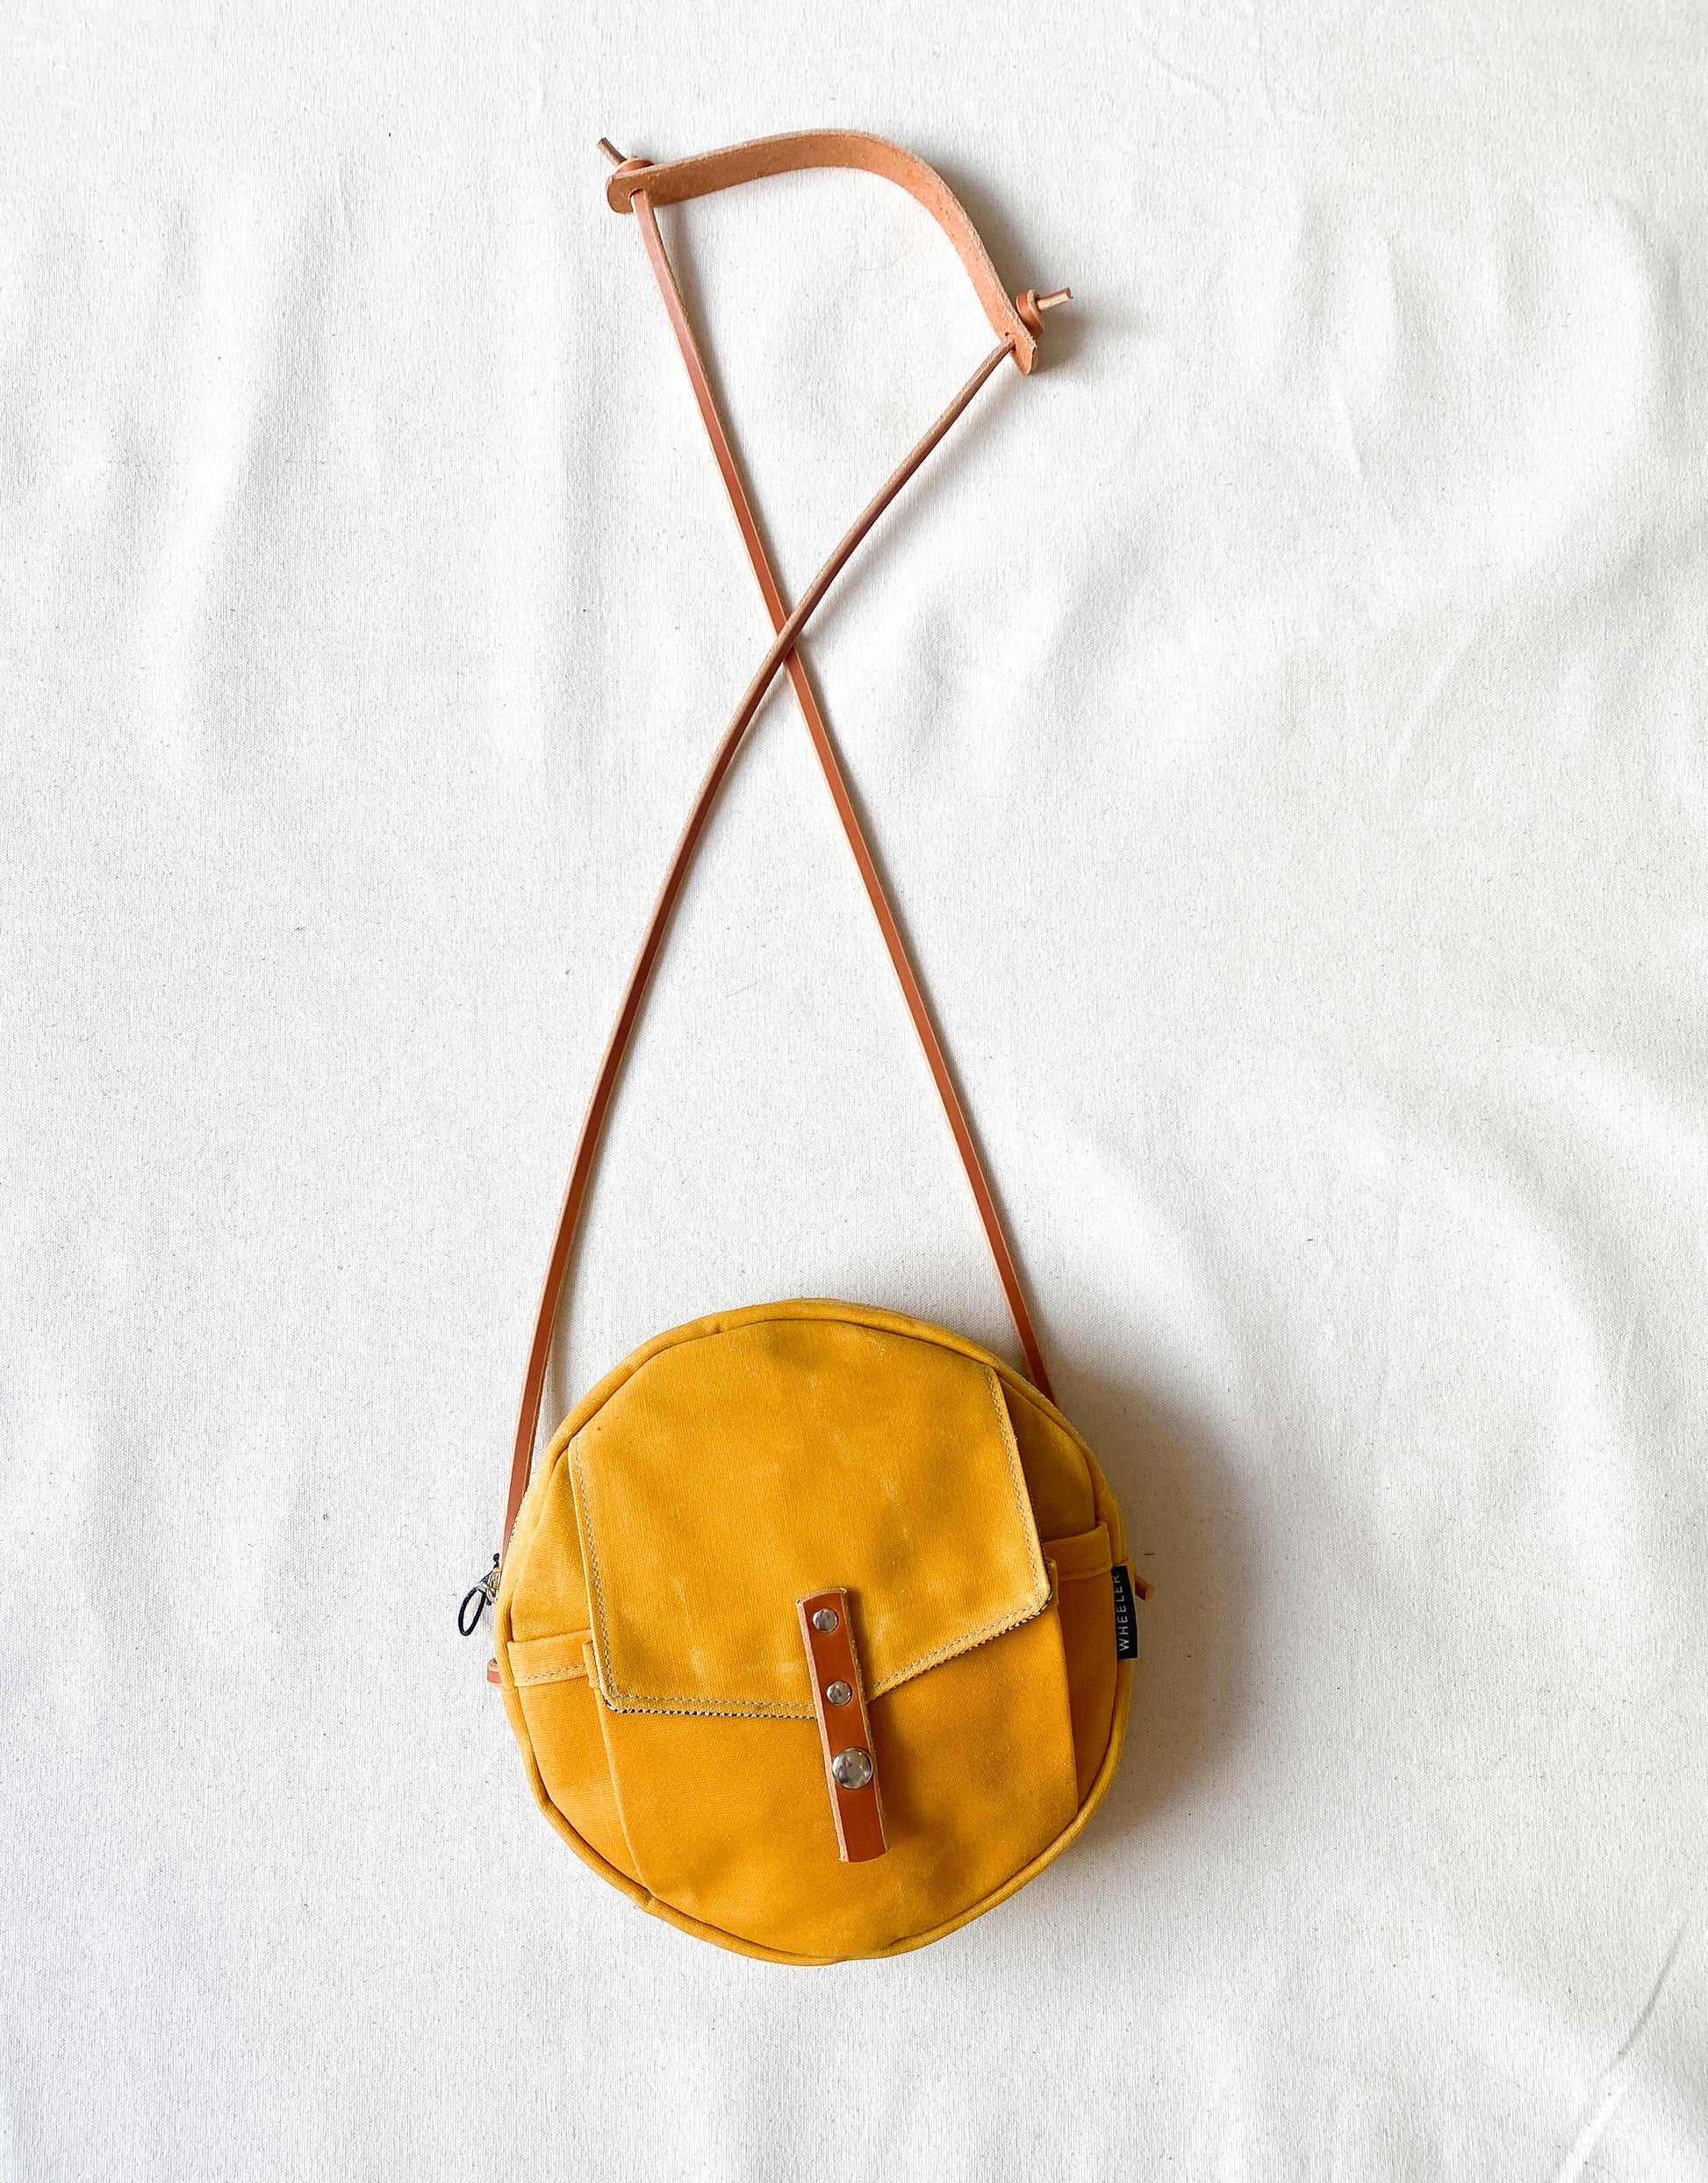 Circle bag with leather straps in yellow.